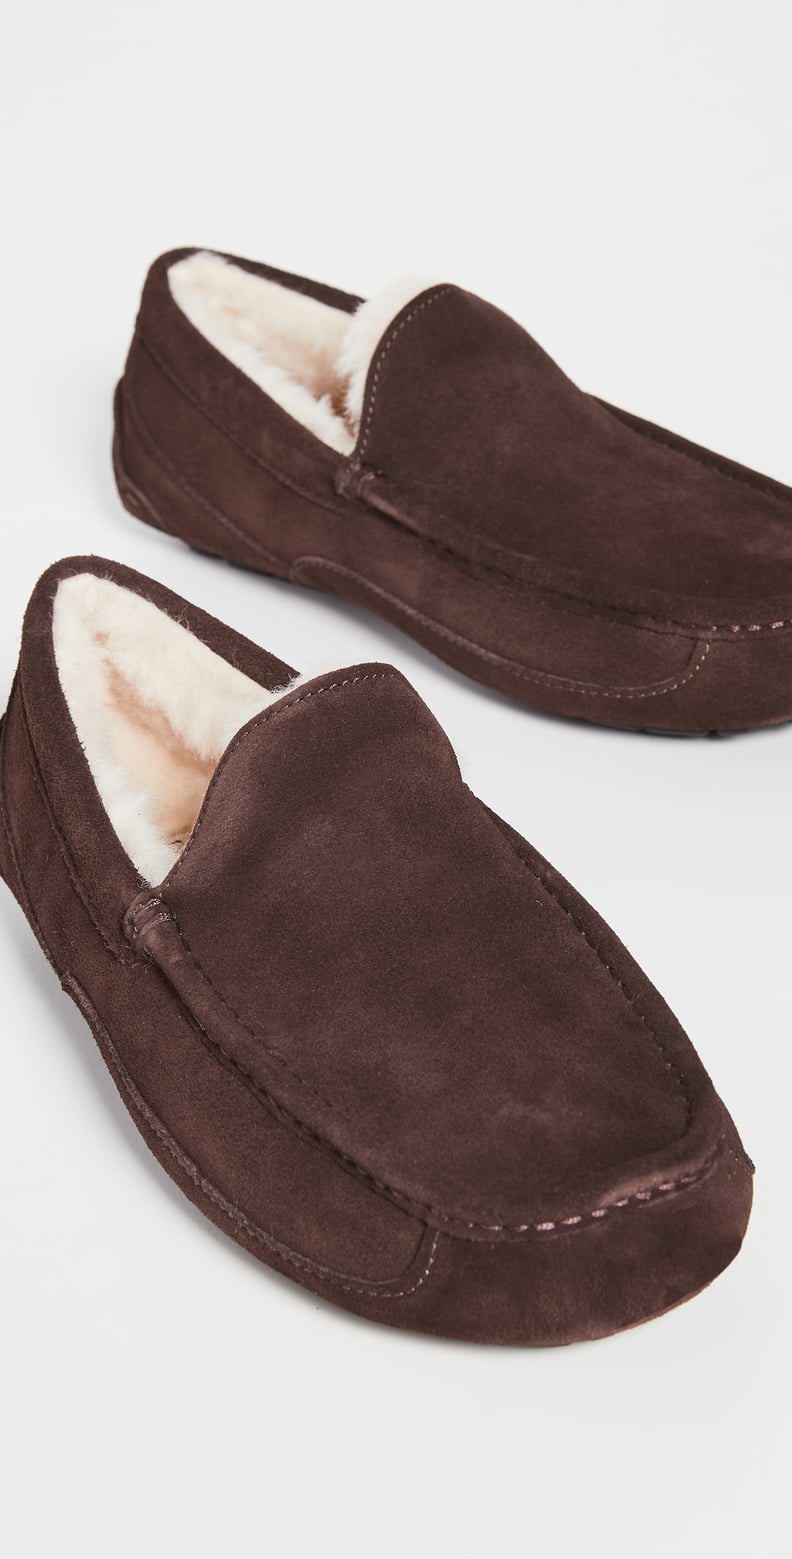 Cozy Slippers: UGG Ascot Slippers